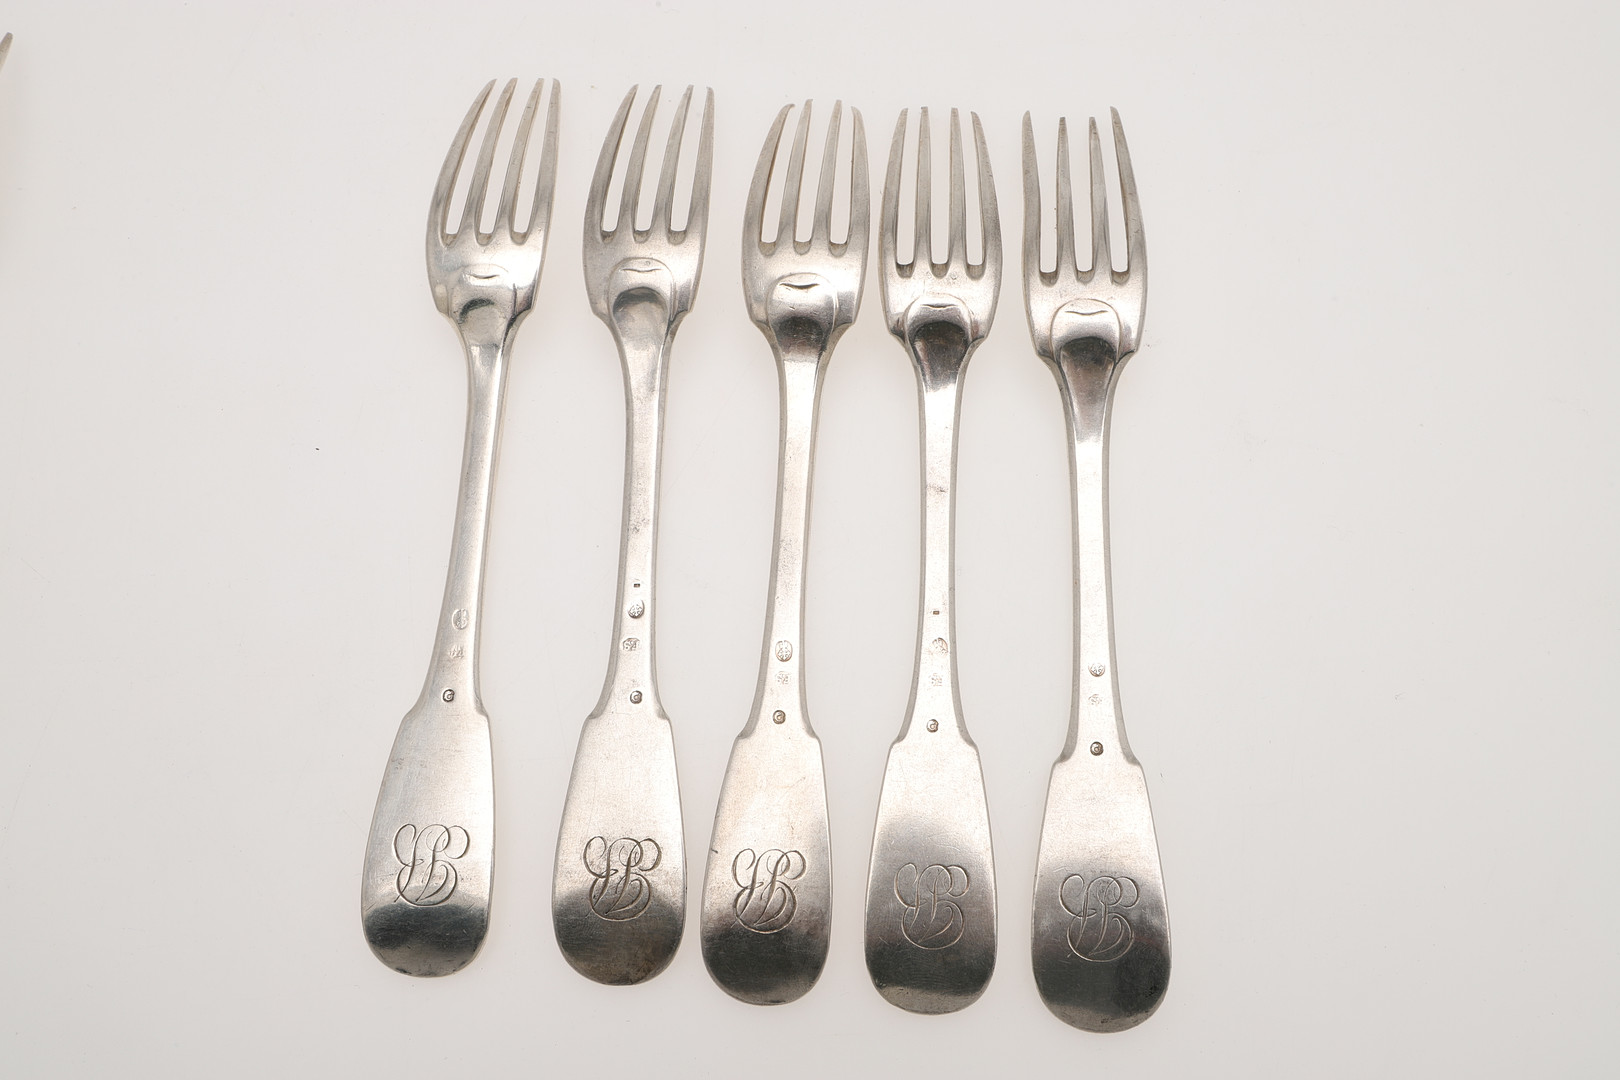 LATE 18TH/ EARLY 19TH CENTURY ITALIAN SILVER FLATWARE. - Image 15 of 15